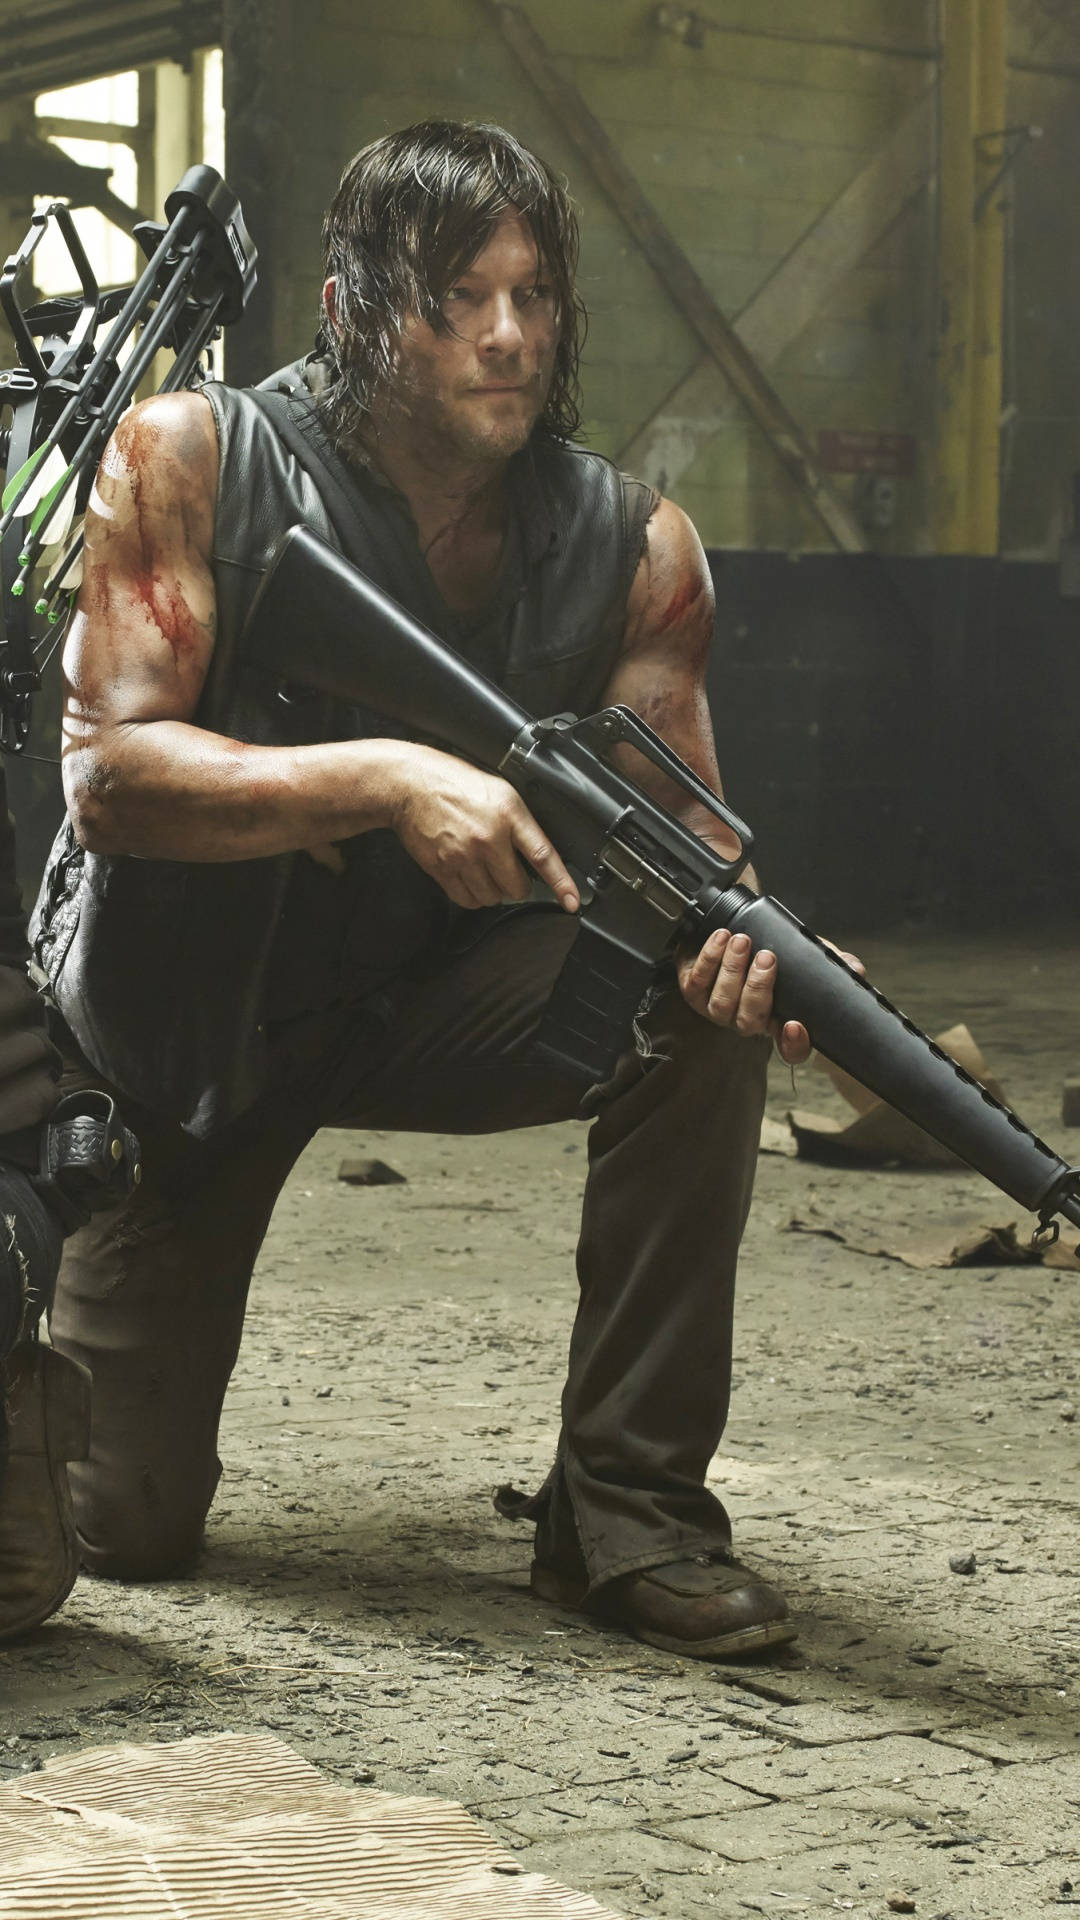 Daryl Dixon of The Walking Dead, Ready for Action Wallpaper